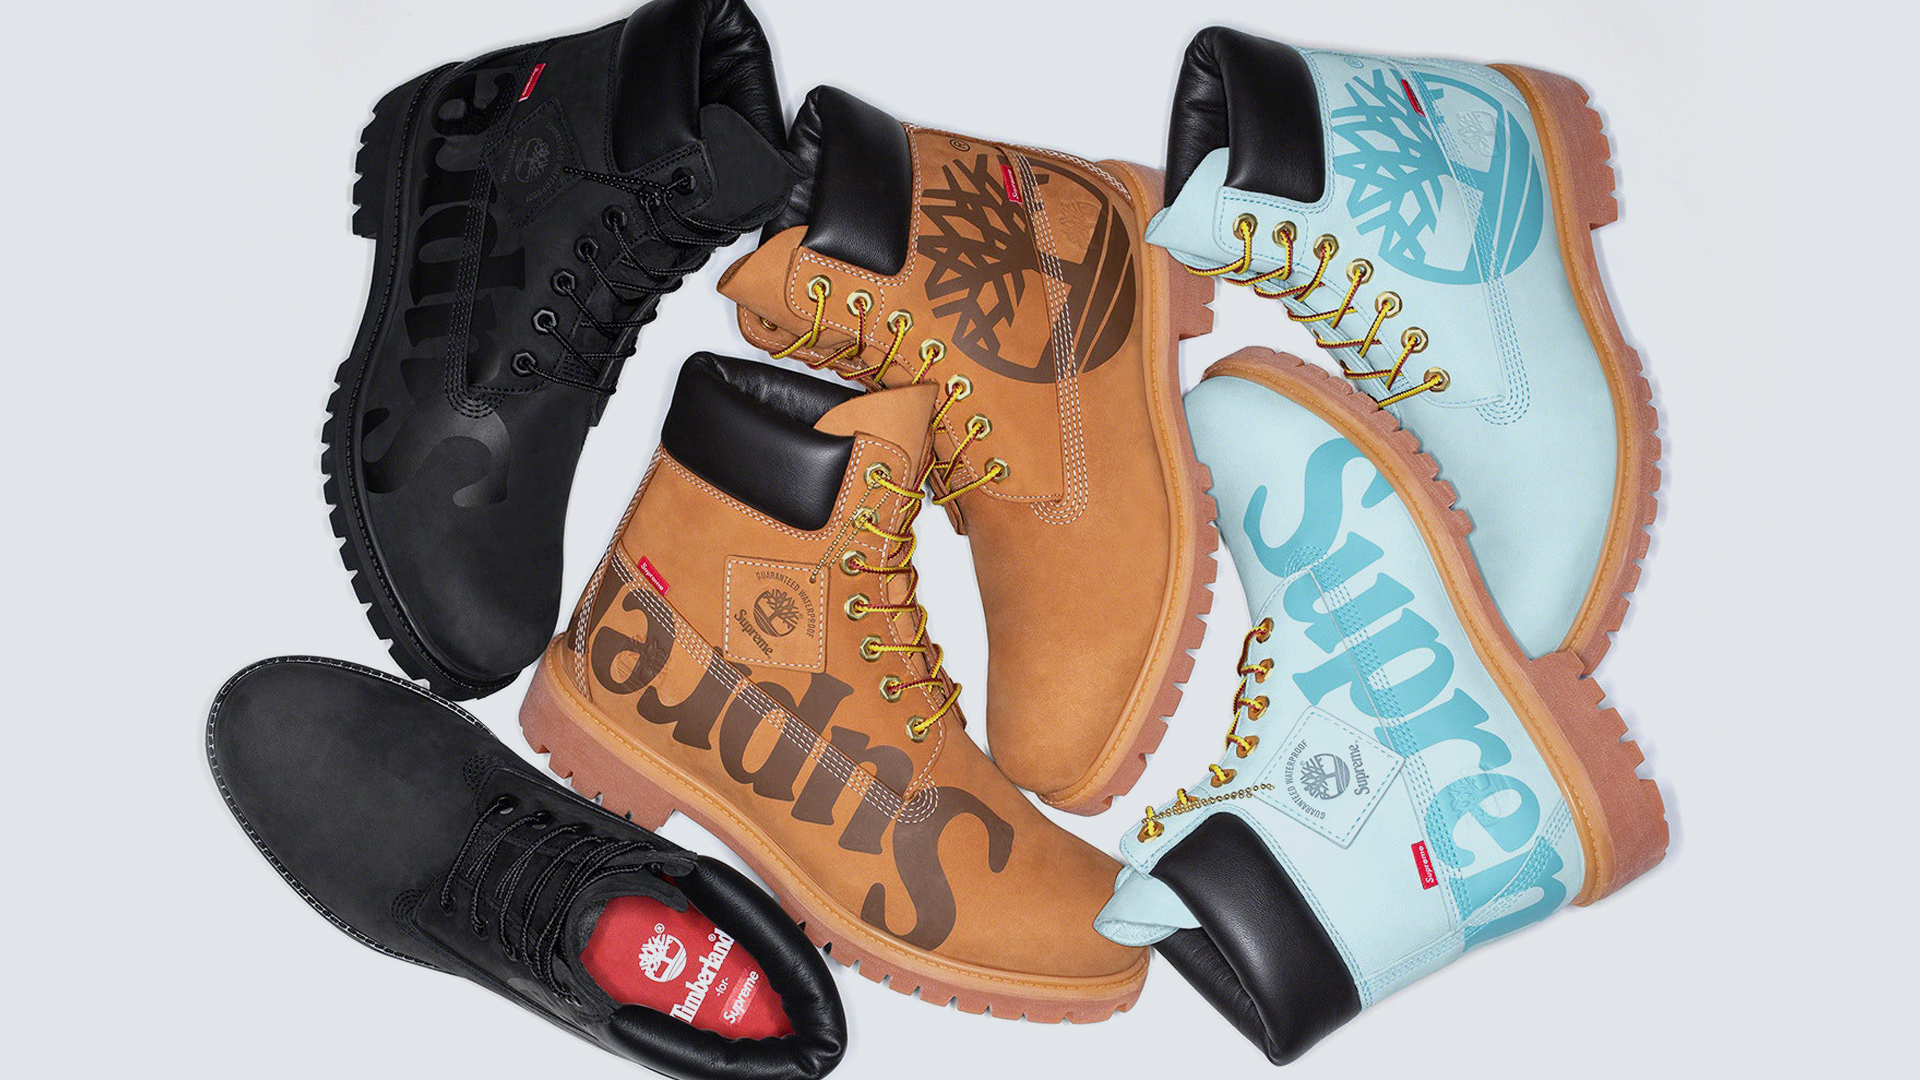 UNBOXING SUPREME TIMBERLAND BOOTS WEEK 12 FW20 